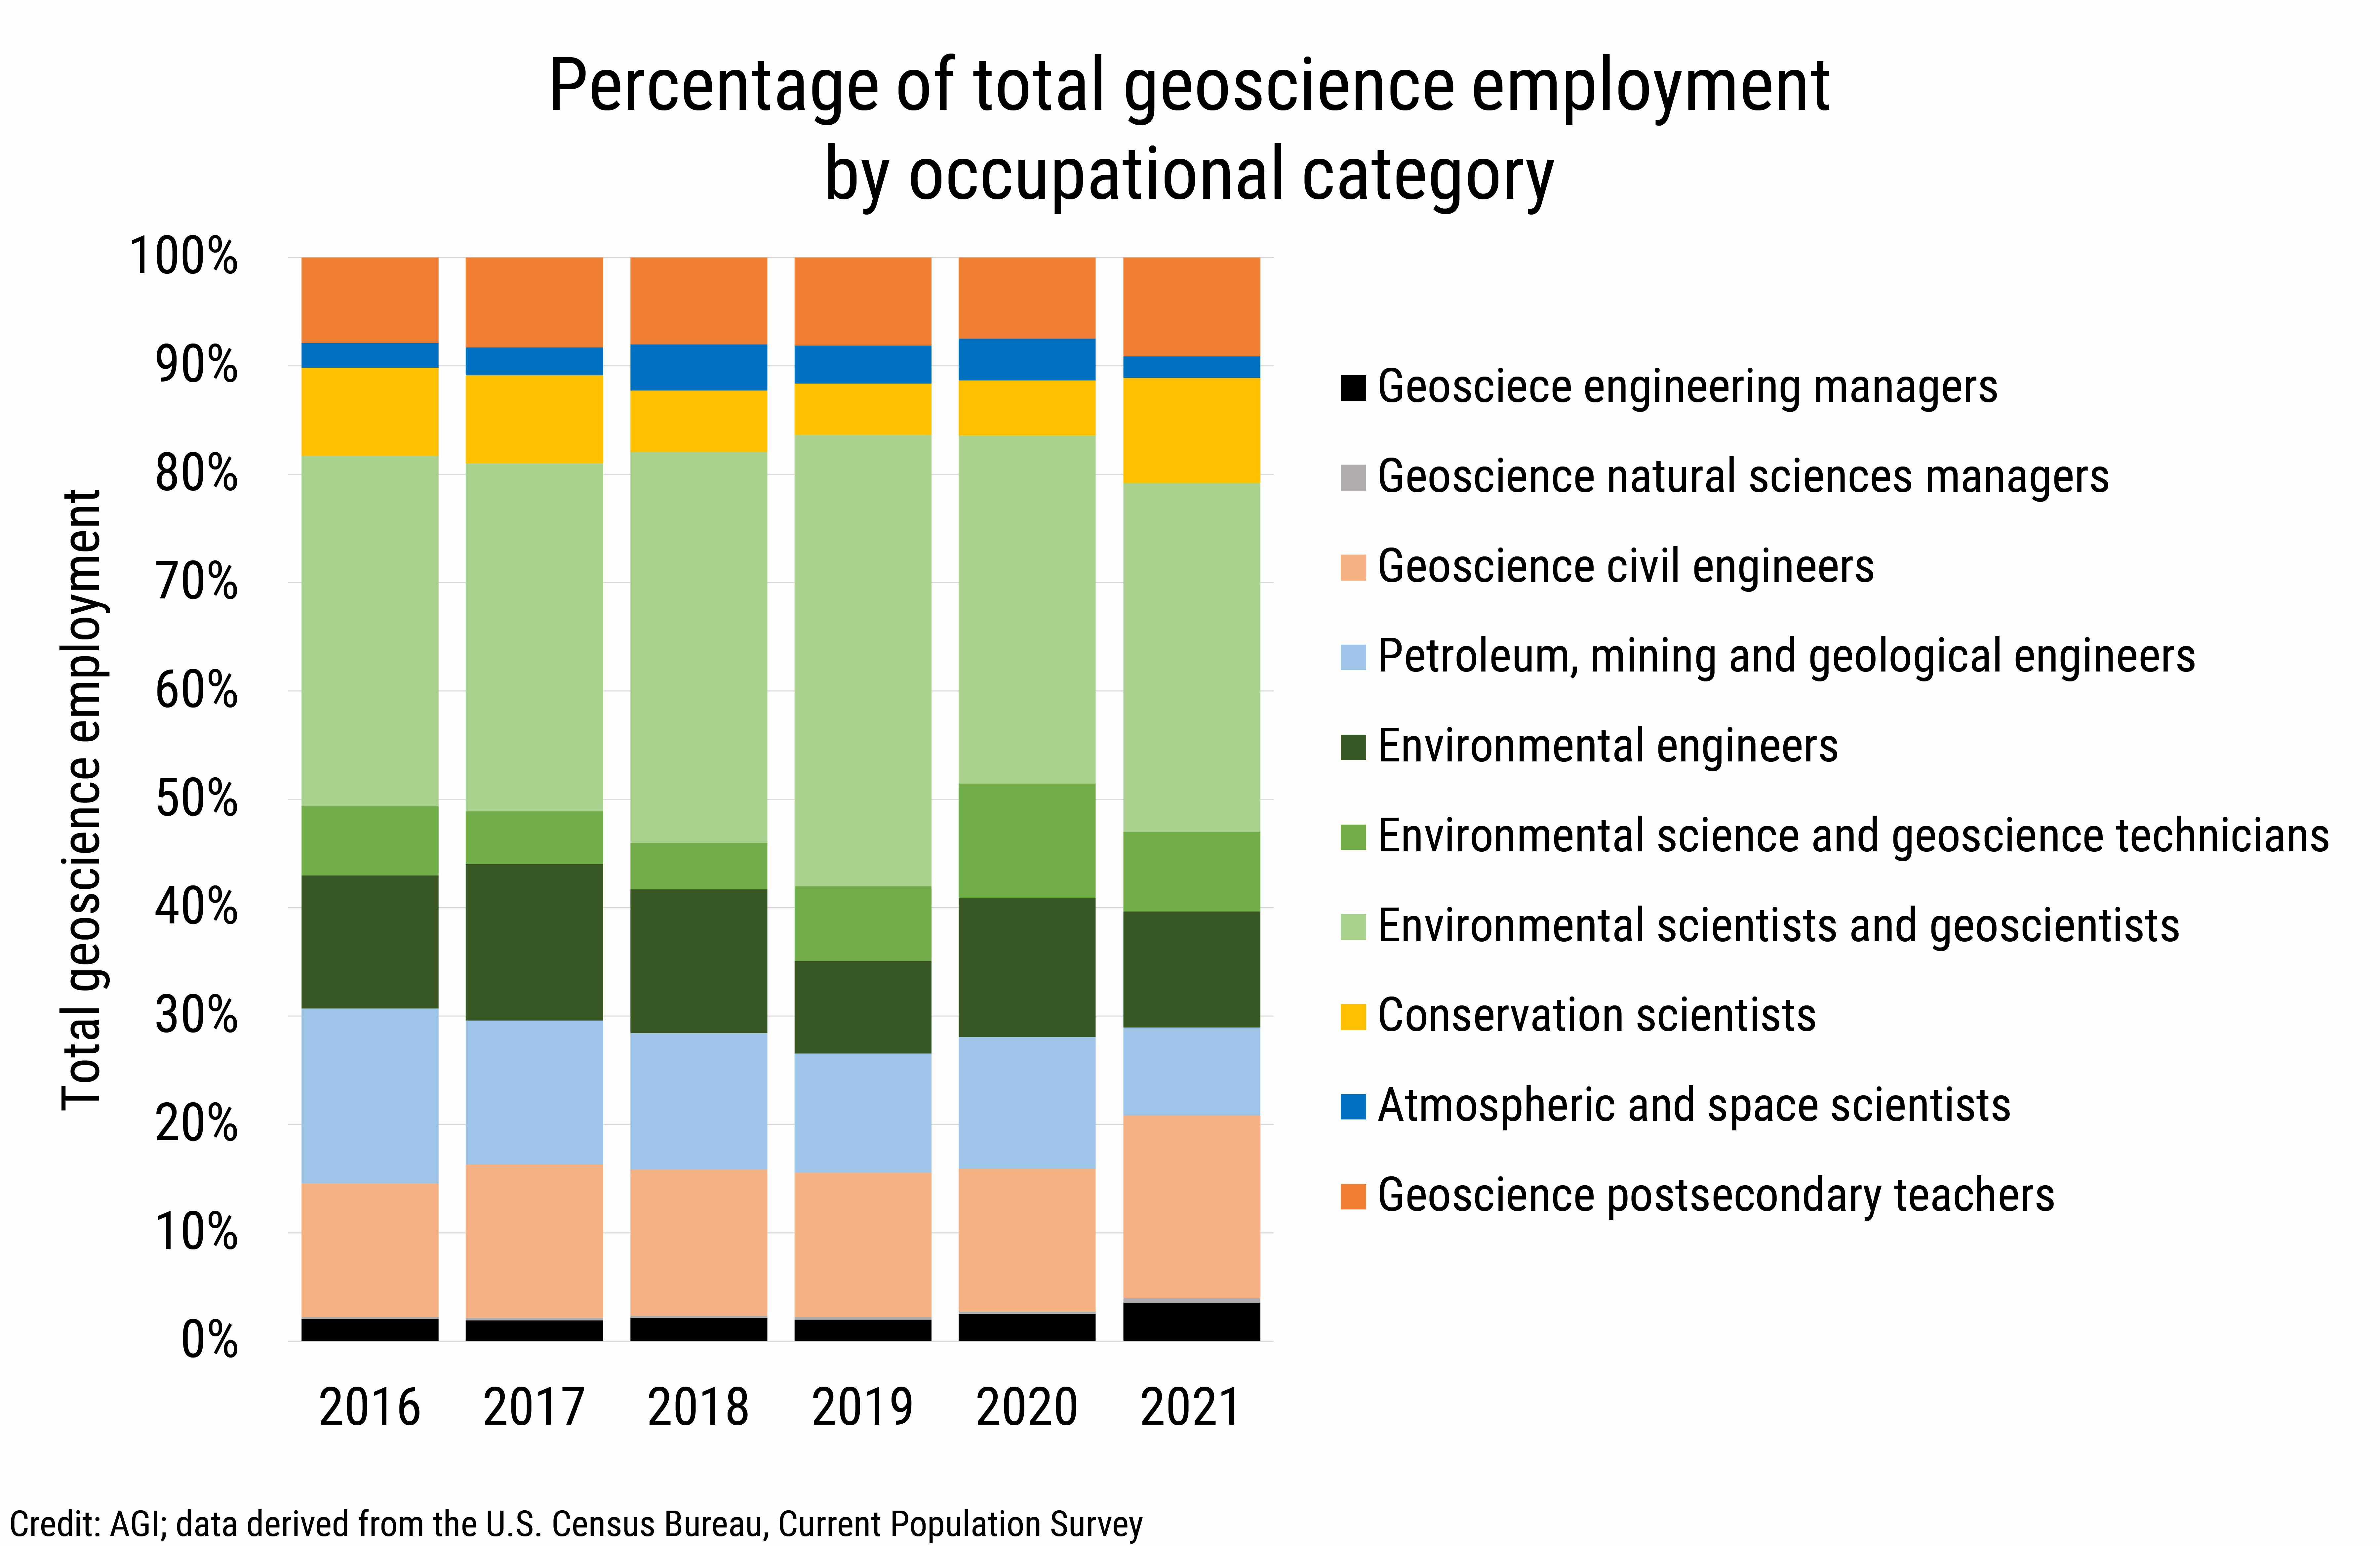 DB_2021-010 chart 02: Percentage of total geoscience employment by occupational category (Credit: AGI, data derived from the U.S. Census Bureau, Current Population Survey)